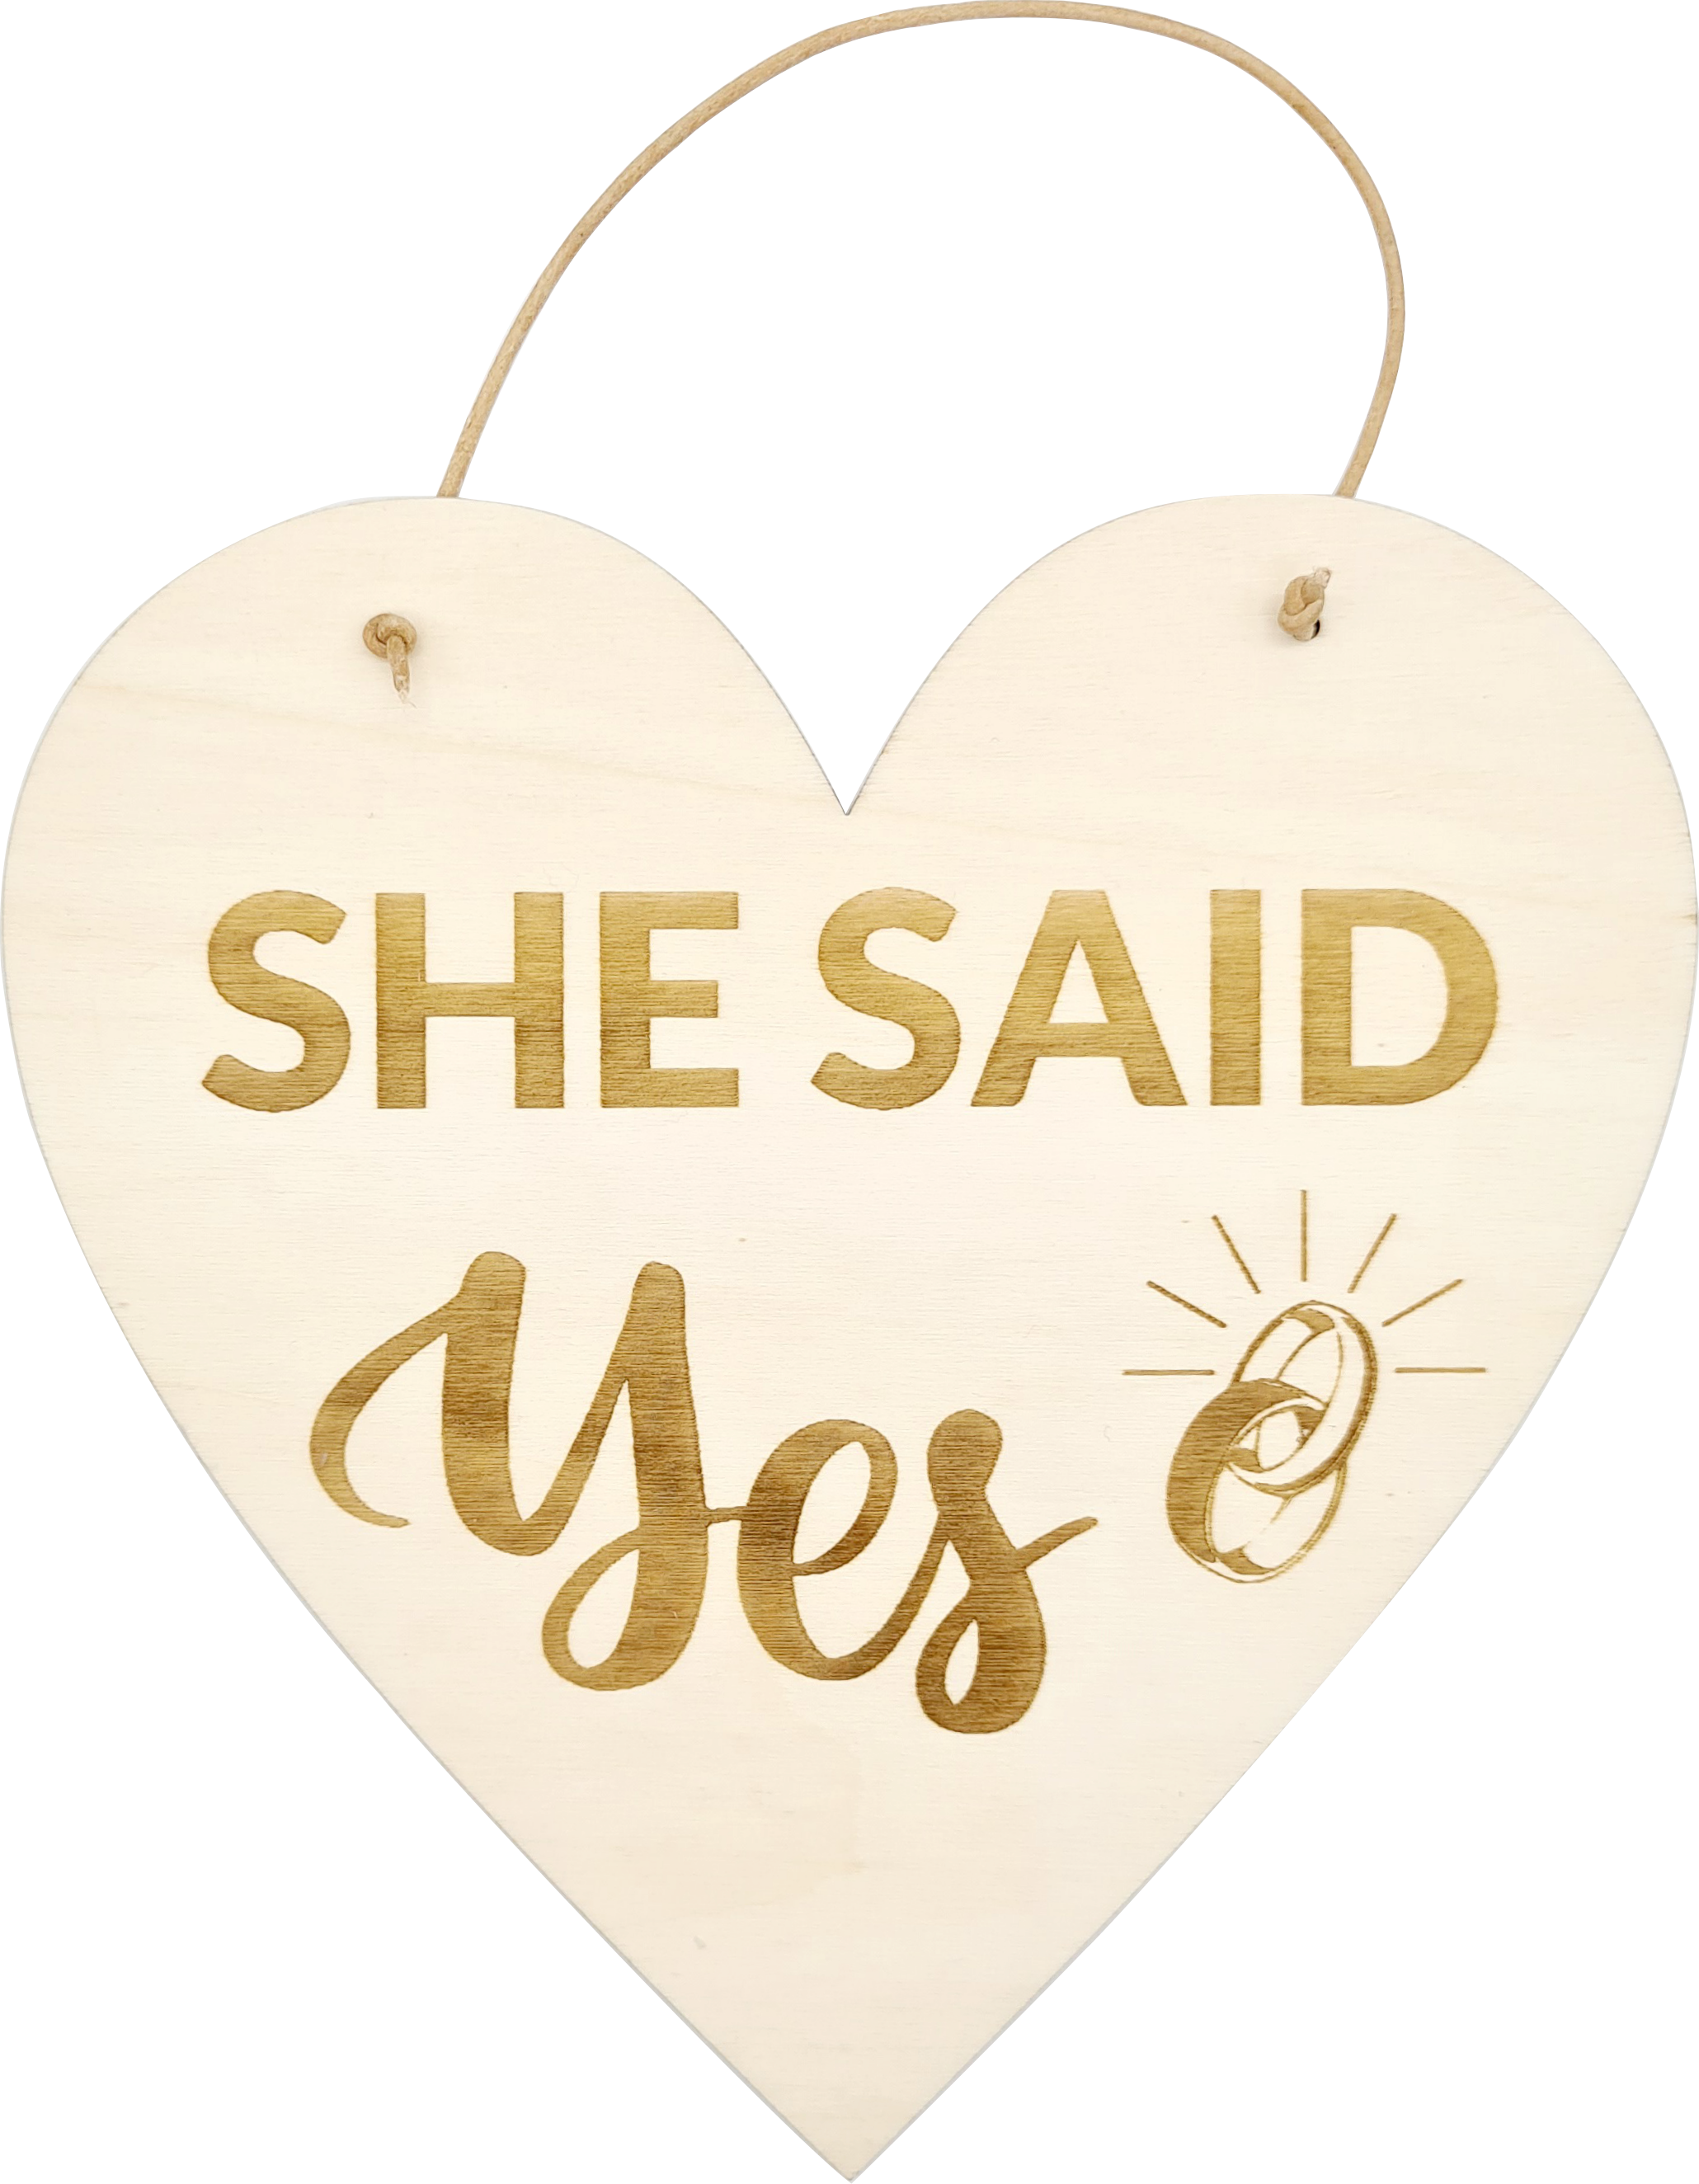 Herz mit Beschriftung - She said yes